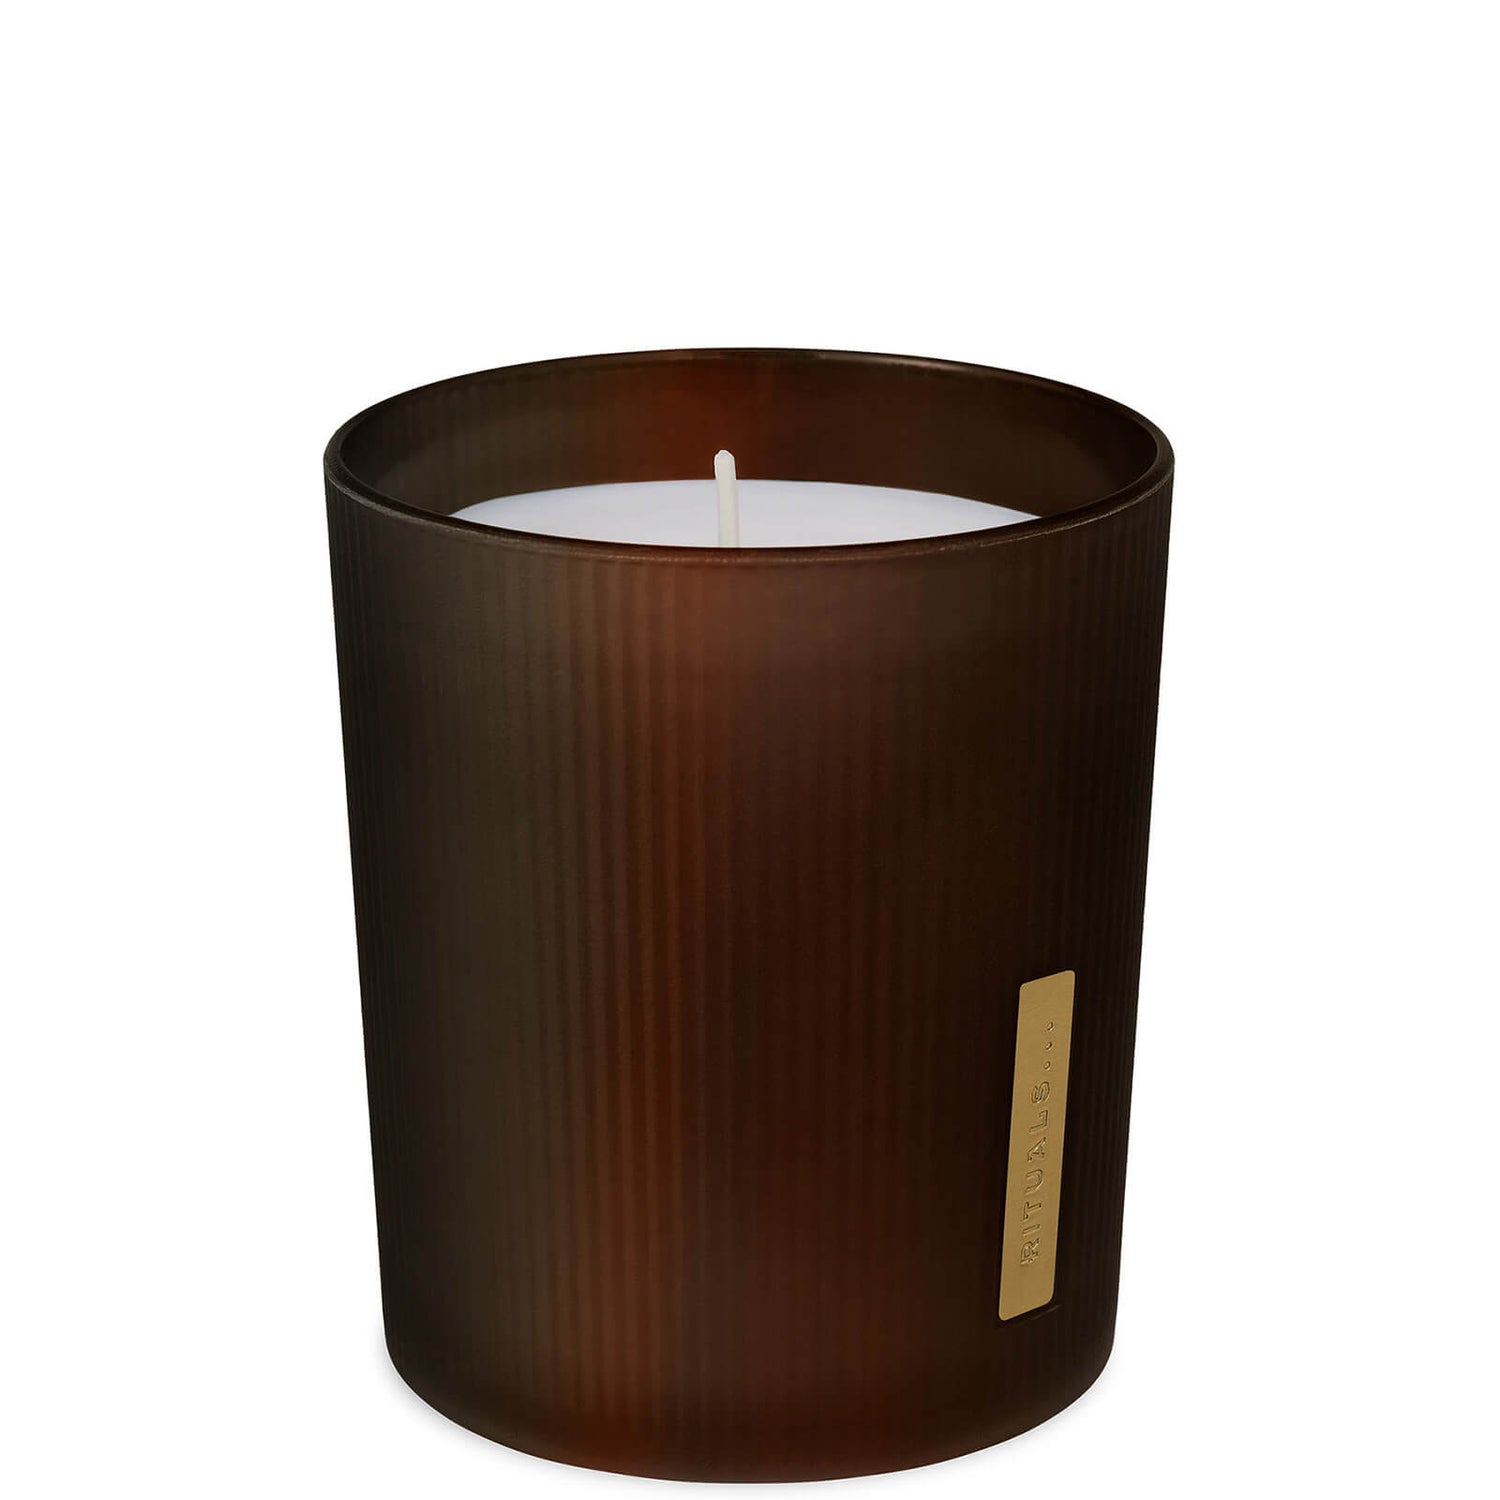 RITUALS The Ritual of Mehr Scented Candle, candela profumata 290 g